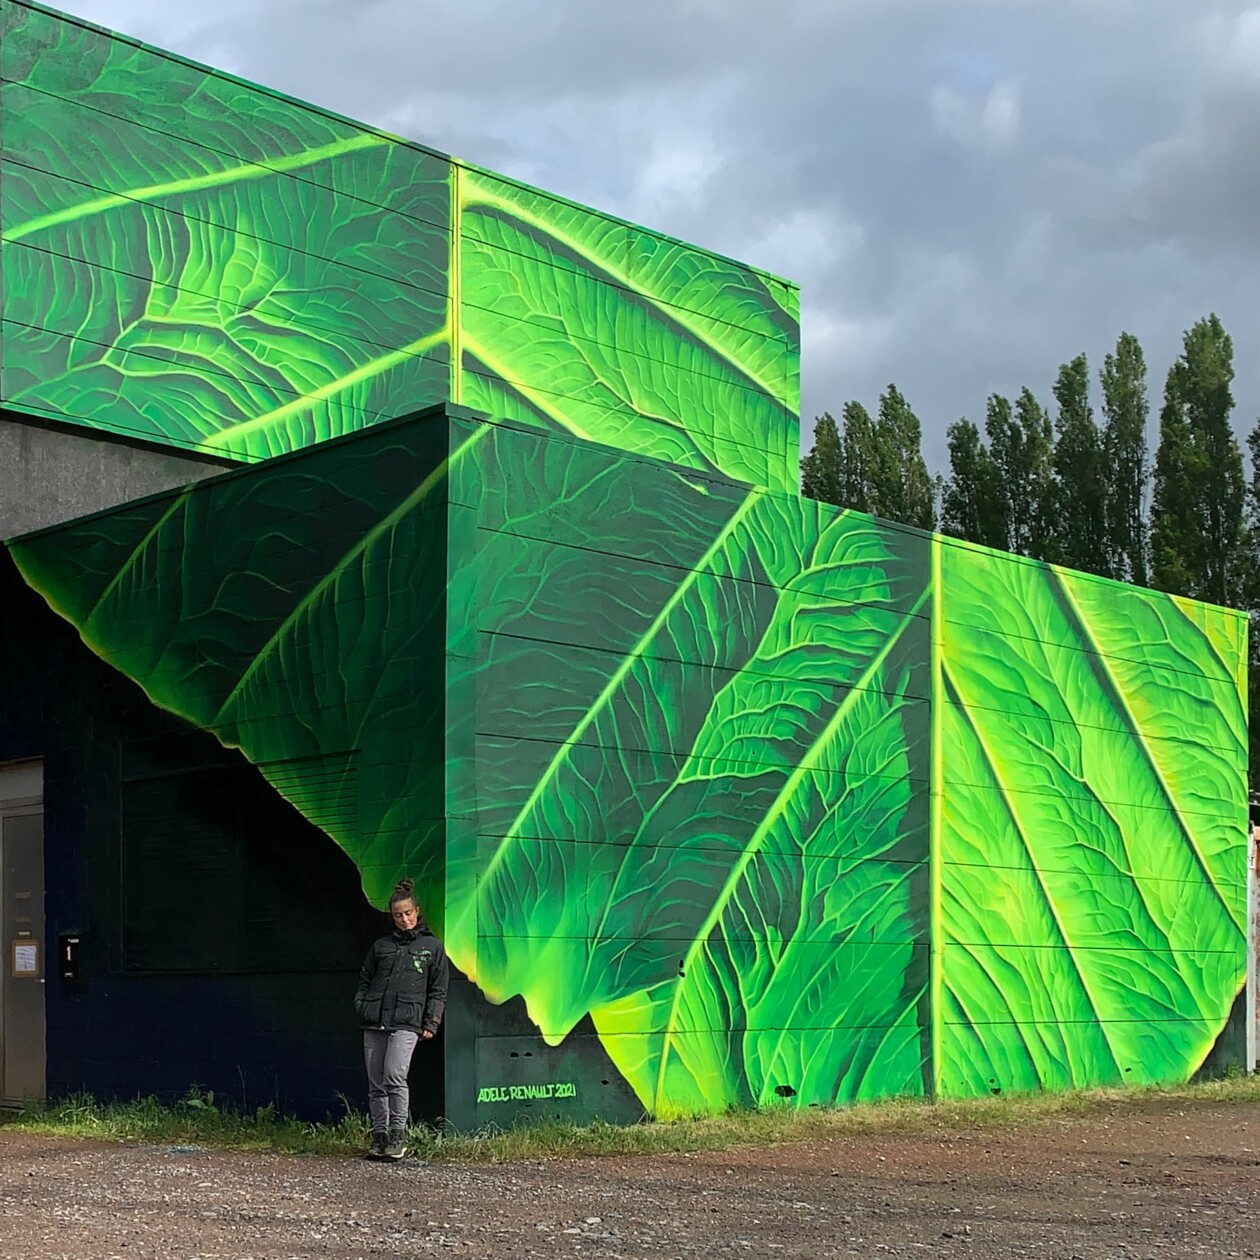 Giant Leafy Murals By Adele Renault (1)